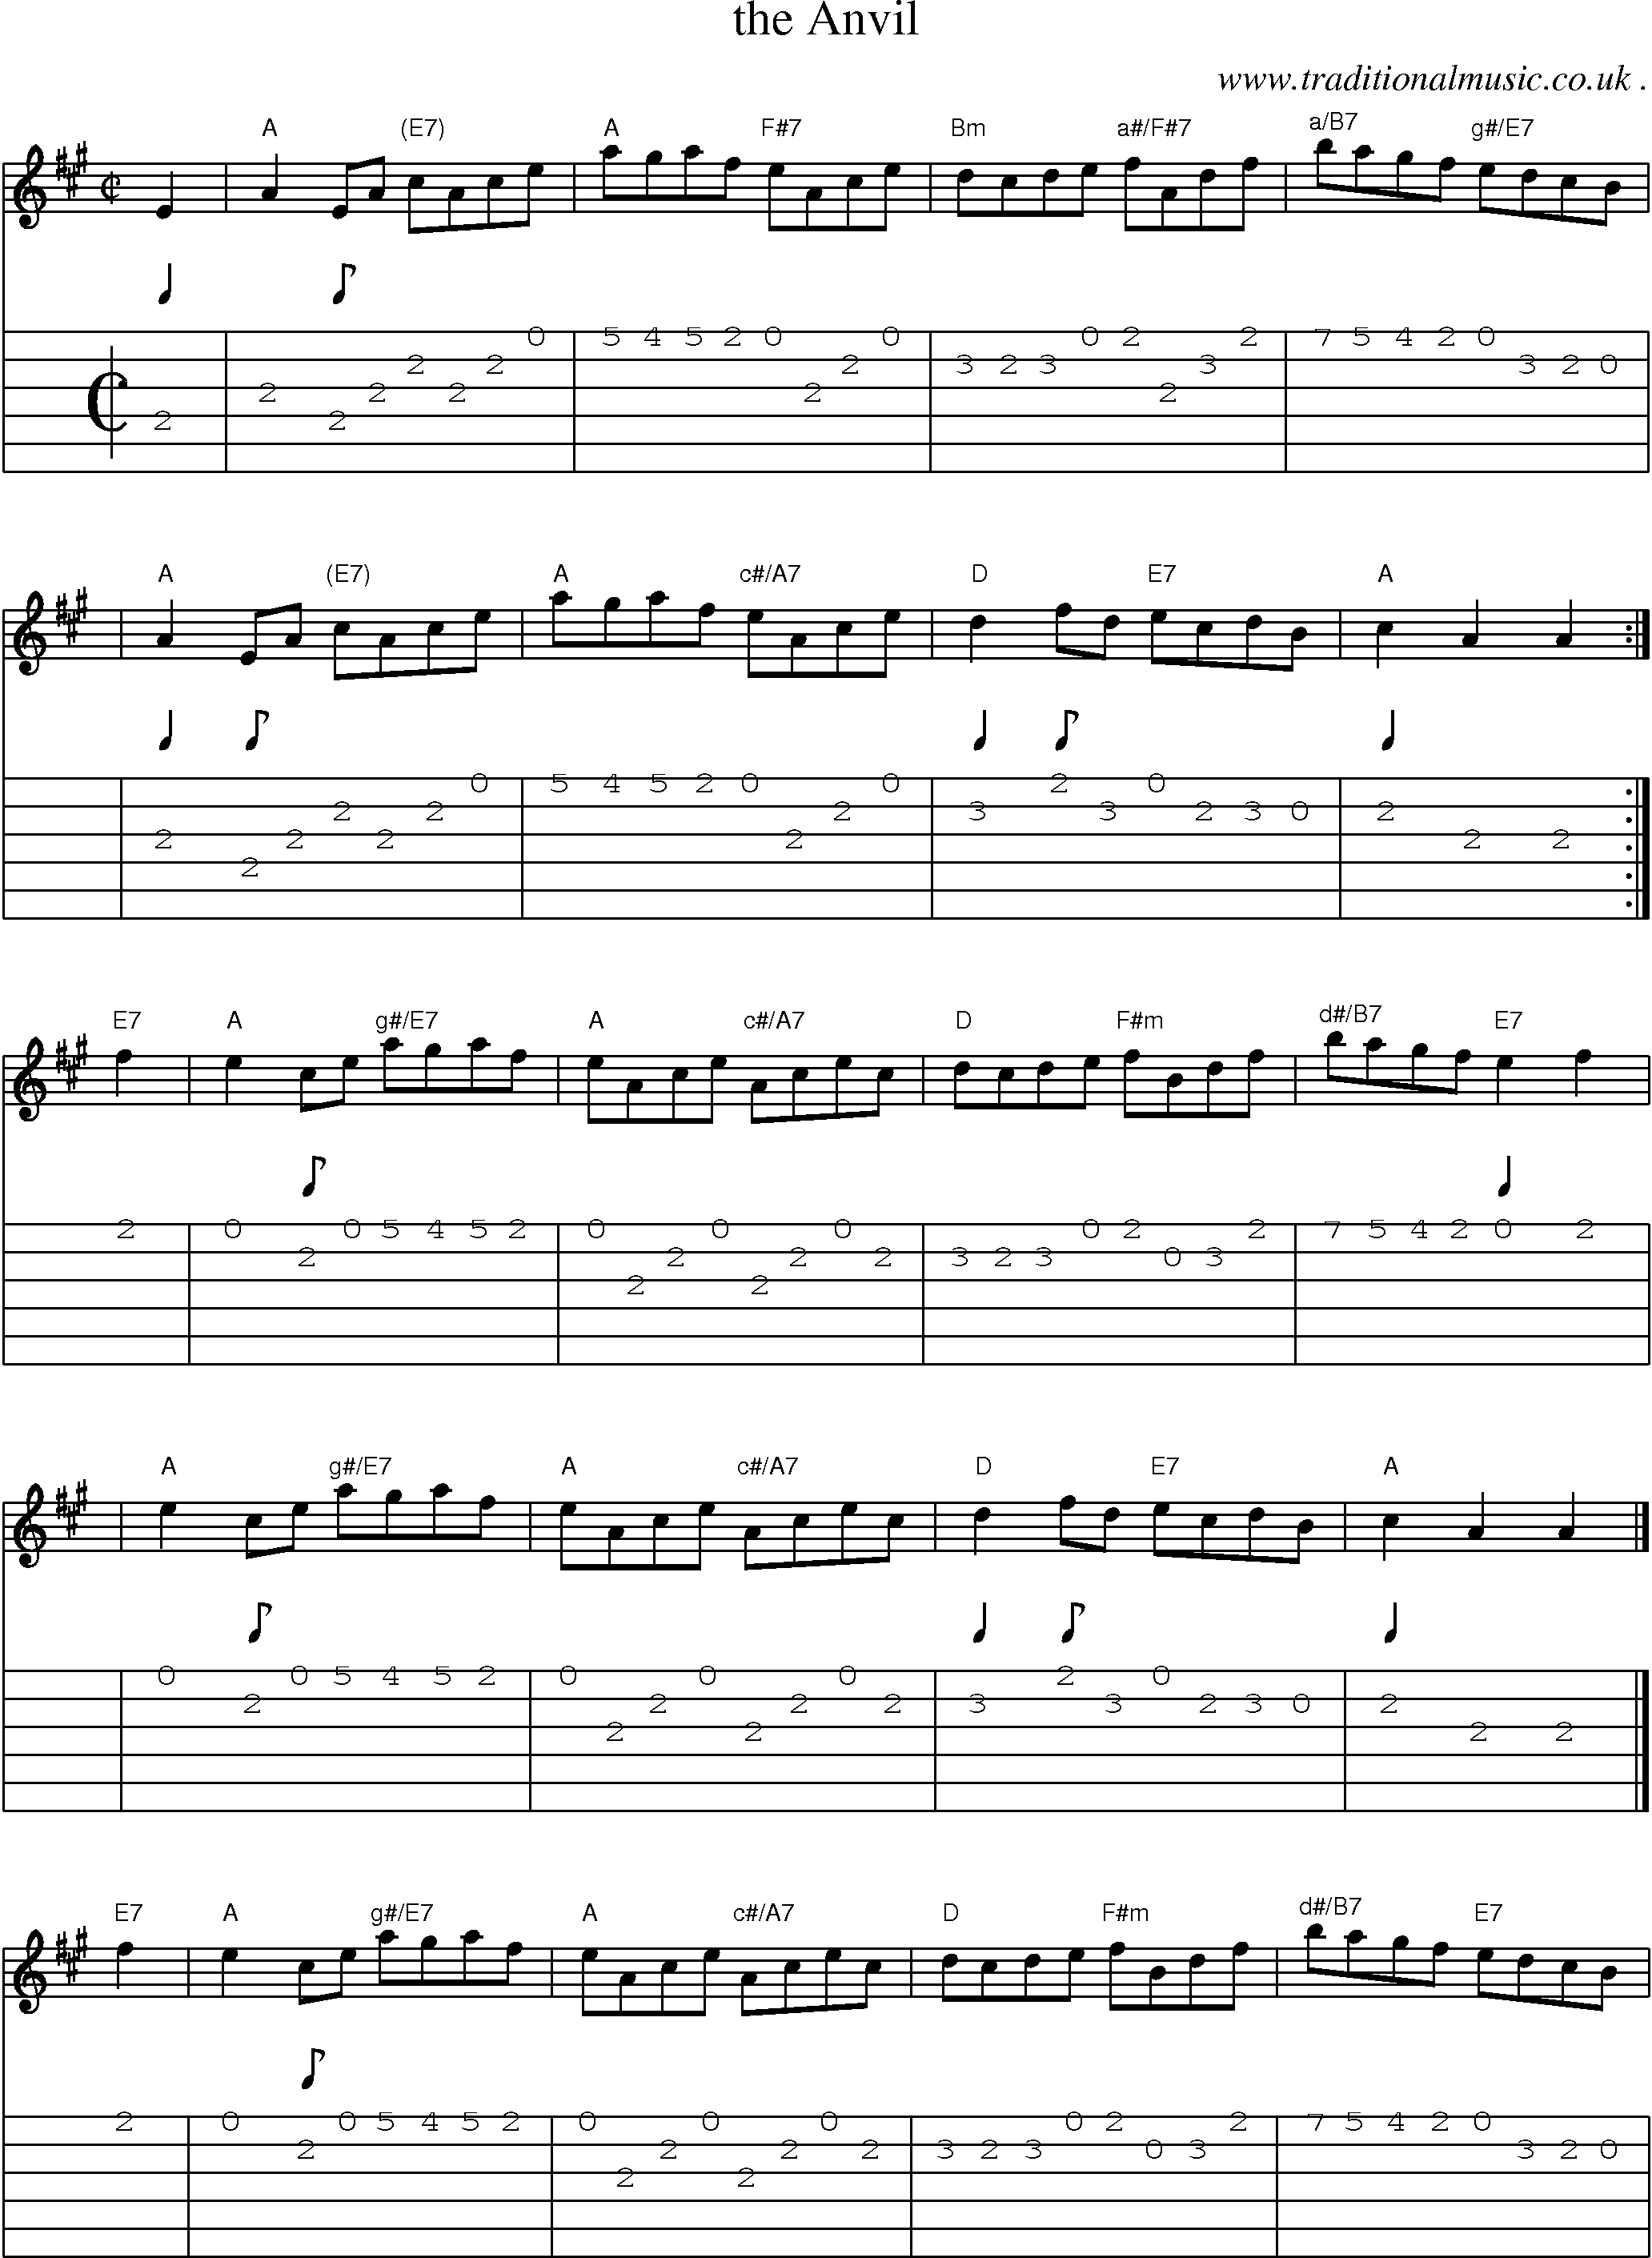 Sheet-music  score, Chords and Guitar Tabs for The Anvil